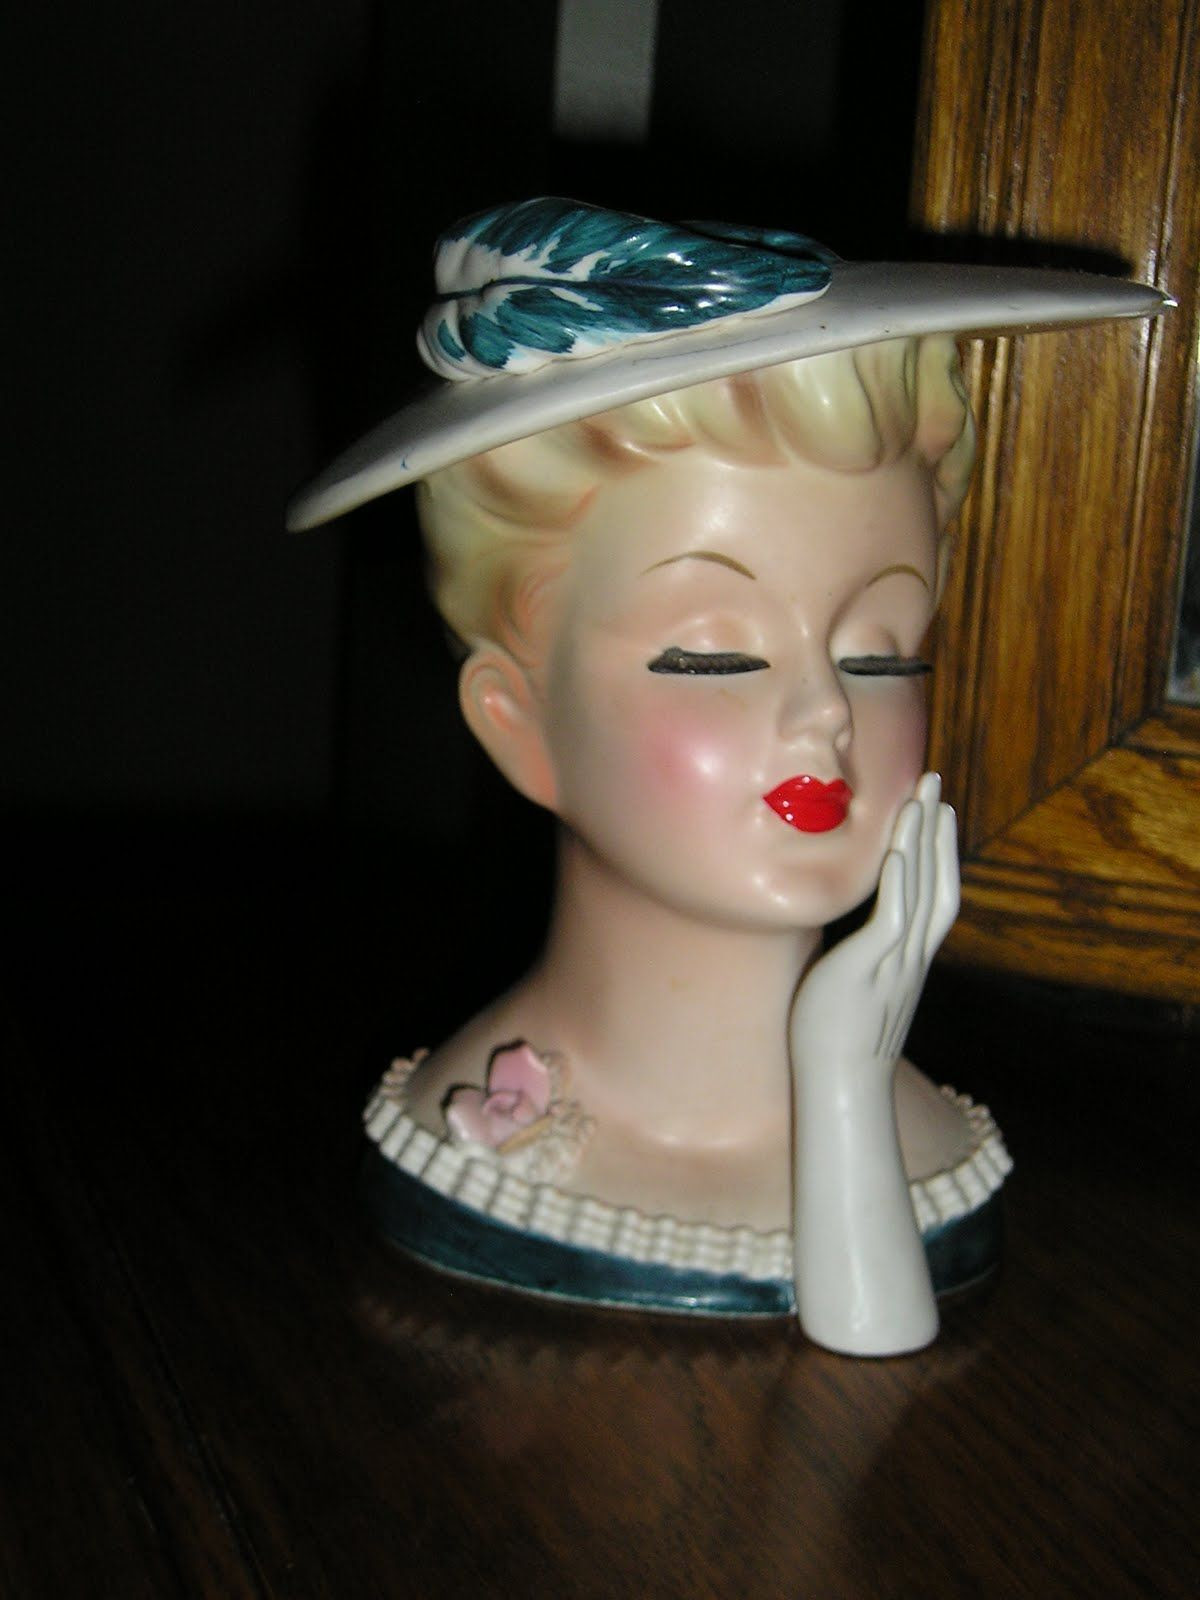 lady head vase collection of she collects vintage head vases for elizabeth pinterest pertaining to she collects vintage head vases